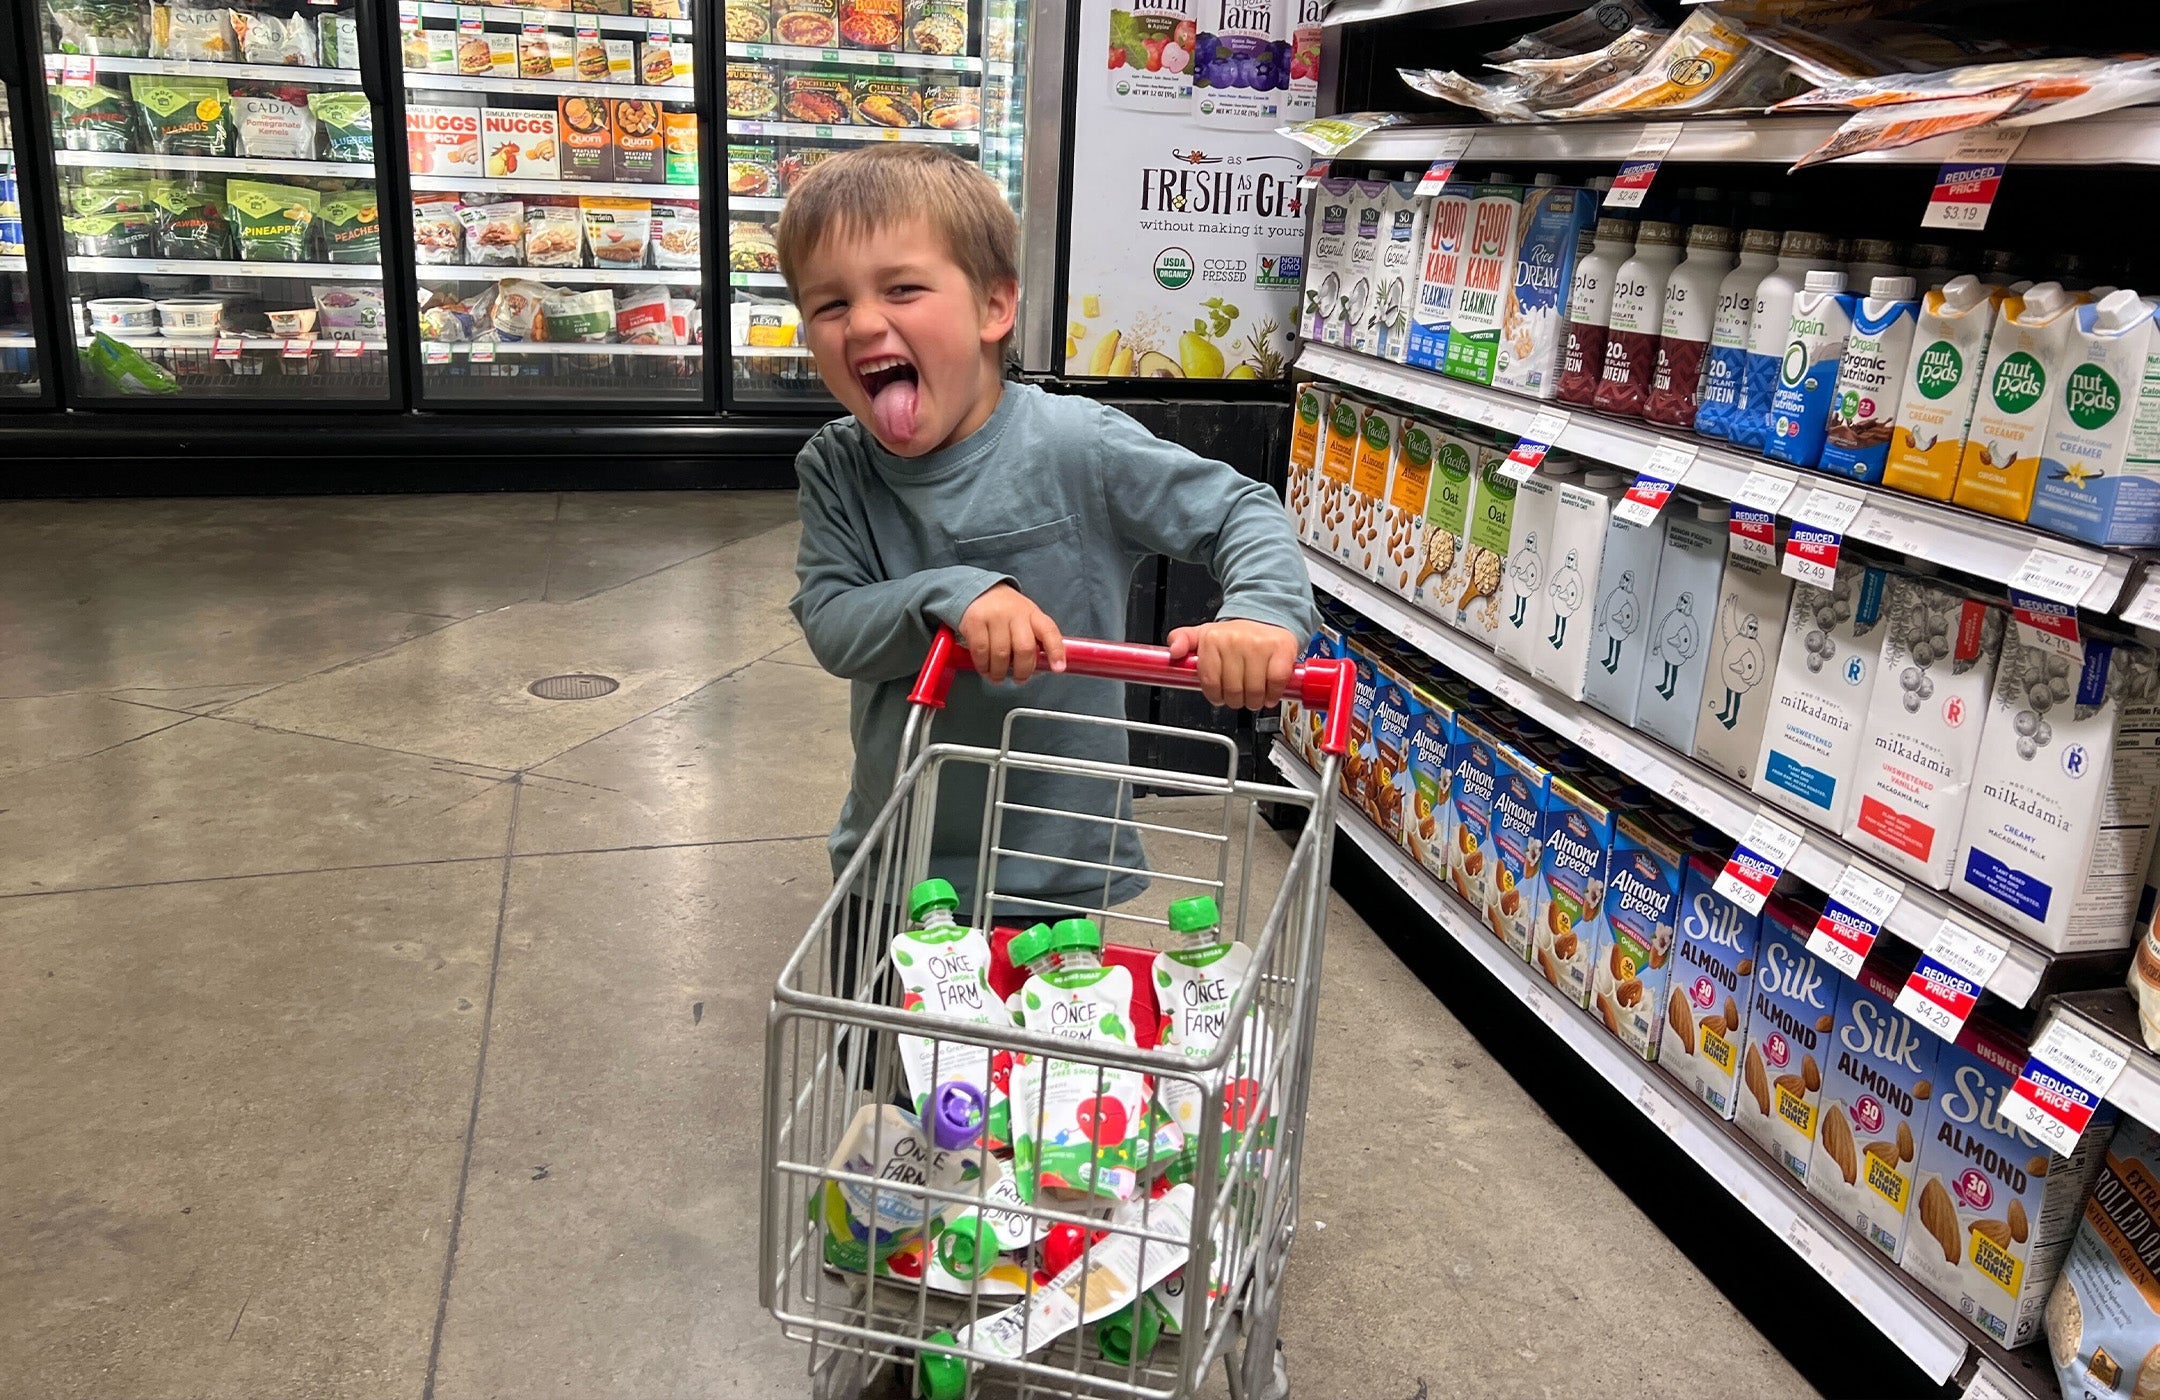 6 Tips for Grocery Shopping with Kids